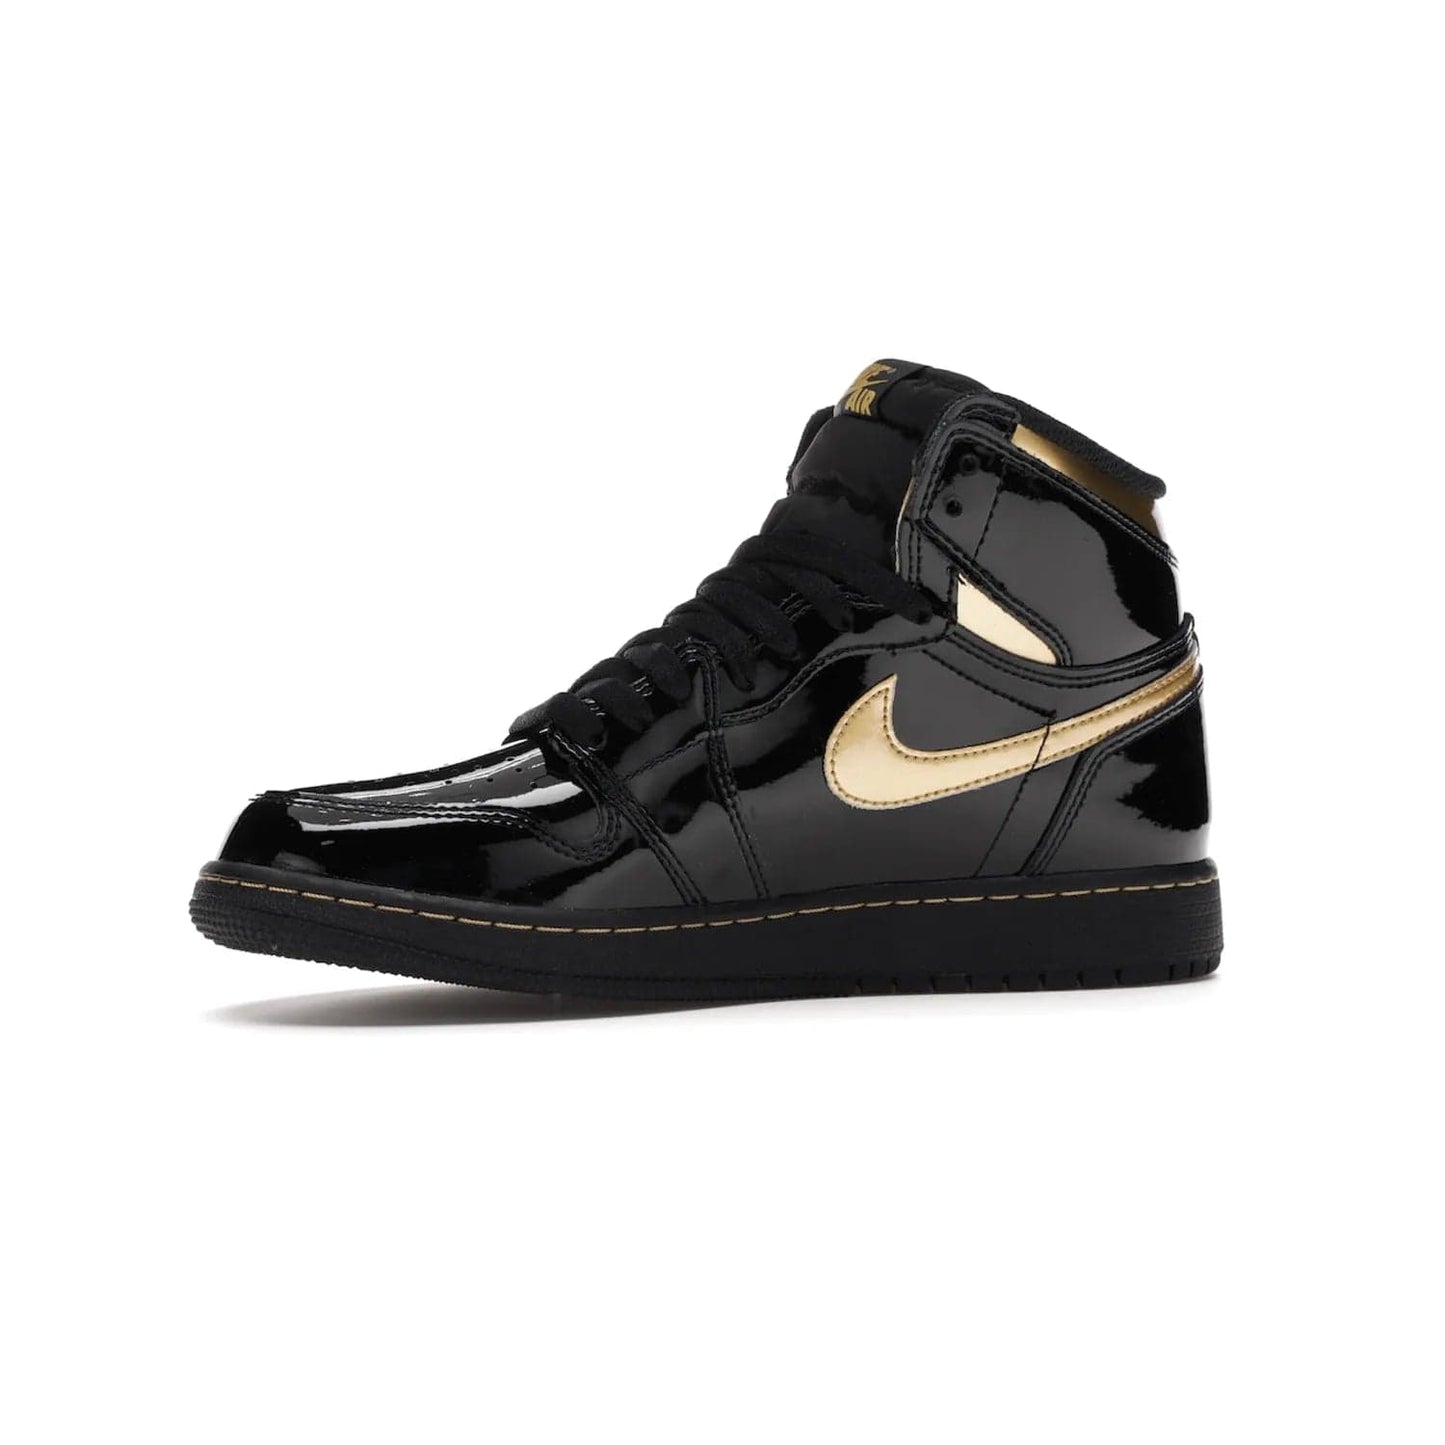 Jordan 1 Retro High Black Metallic Gold (2020) (GS) - Image 17 - Only at www.BallersClubKickz.com - Shop the Kids Air Jordan 1 Retro High in Black Metallic Gold for a stylish and comfortable sneaker kids can love. Featuring black and metallic gold patent leather uppers, metallic gold accents, and an Air sole unit for extra cushioning.